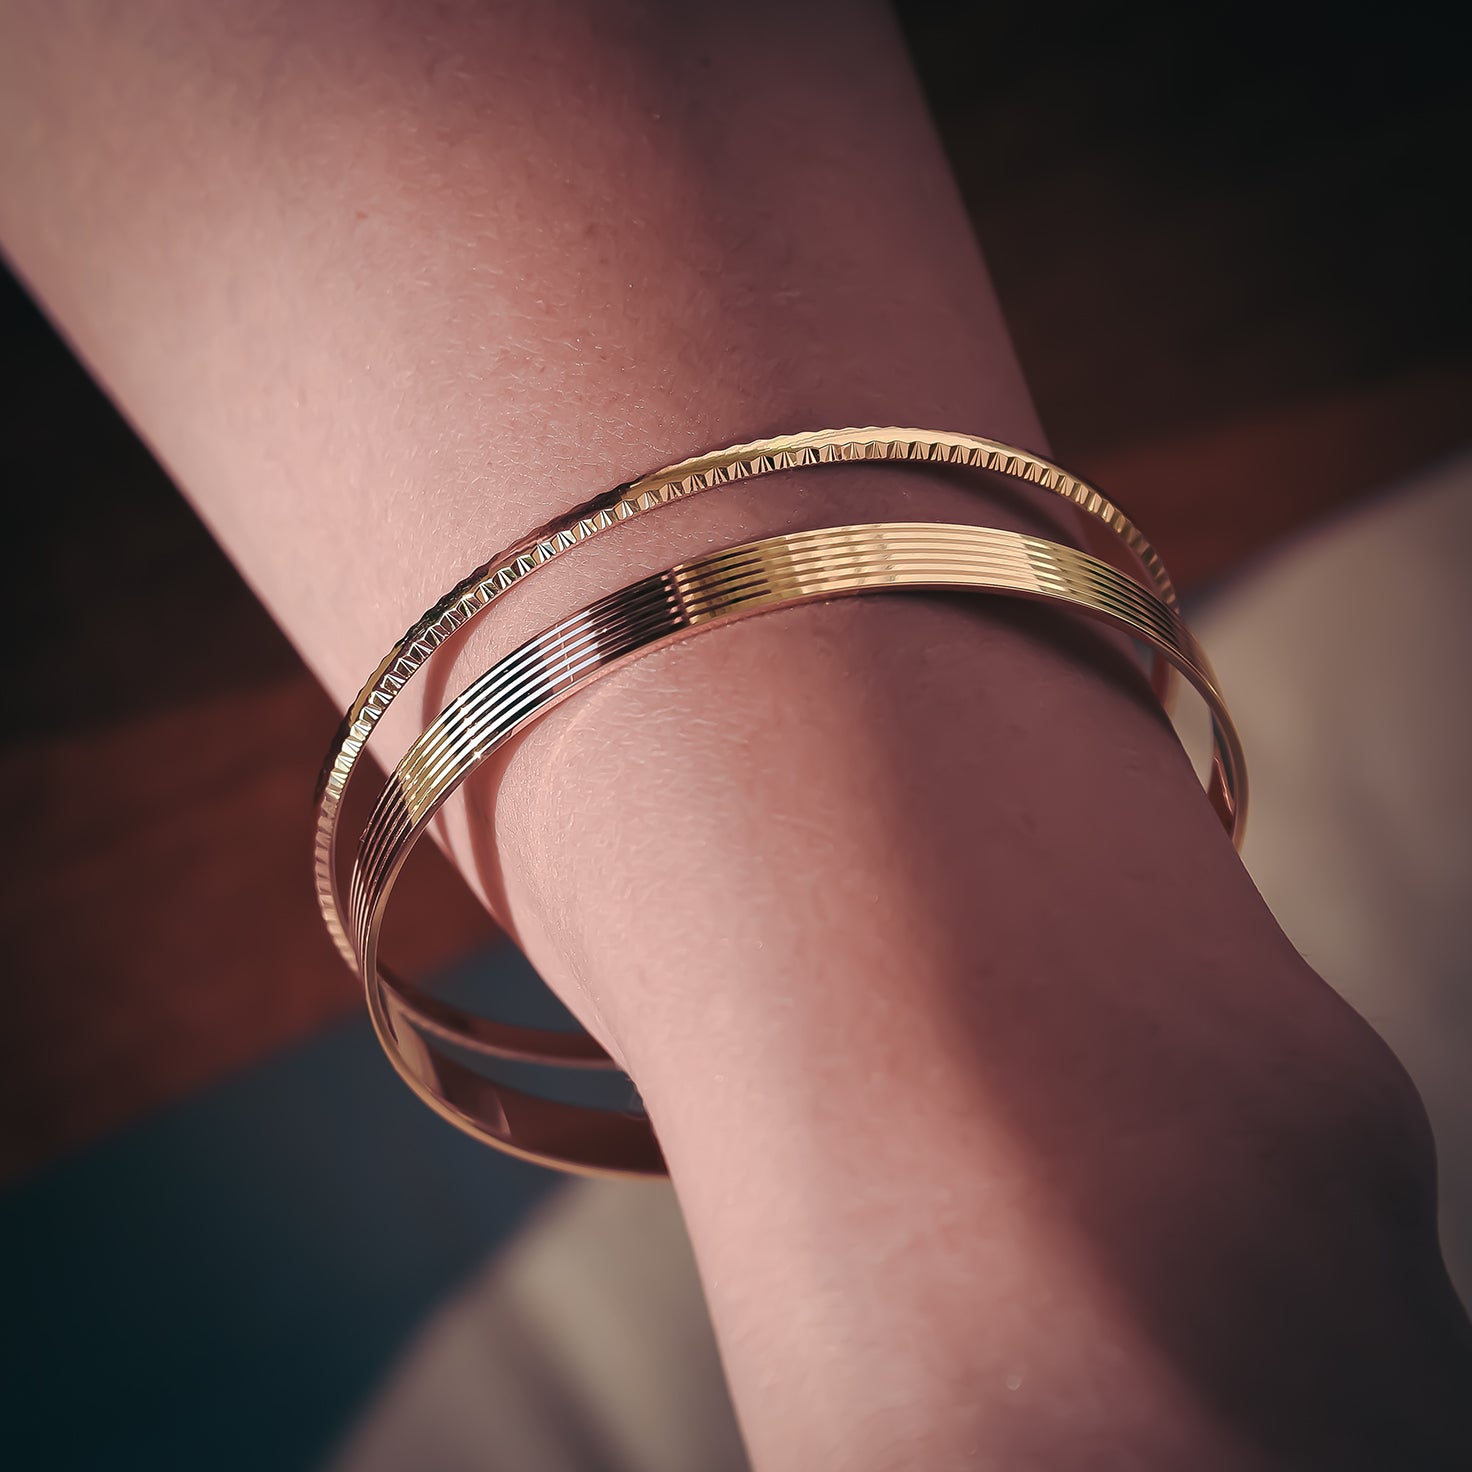 Bracelet MOTION 6mm flexible with pin claps yellow gold 18k 750